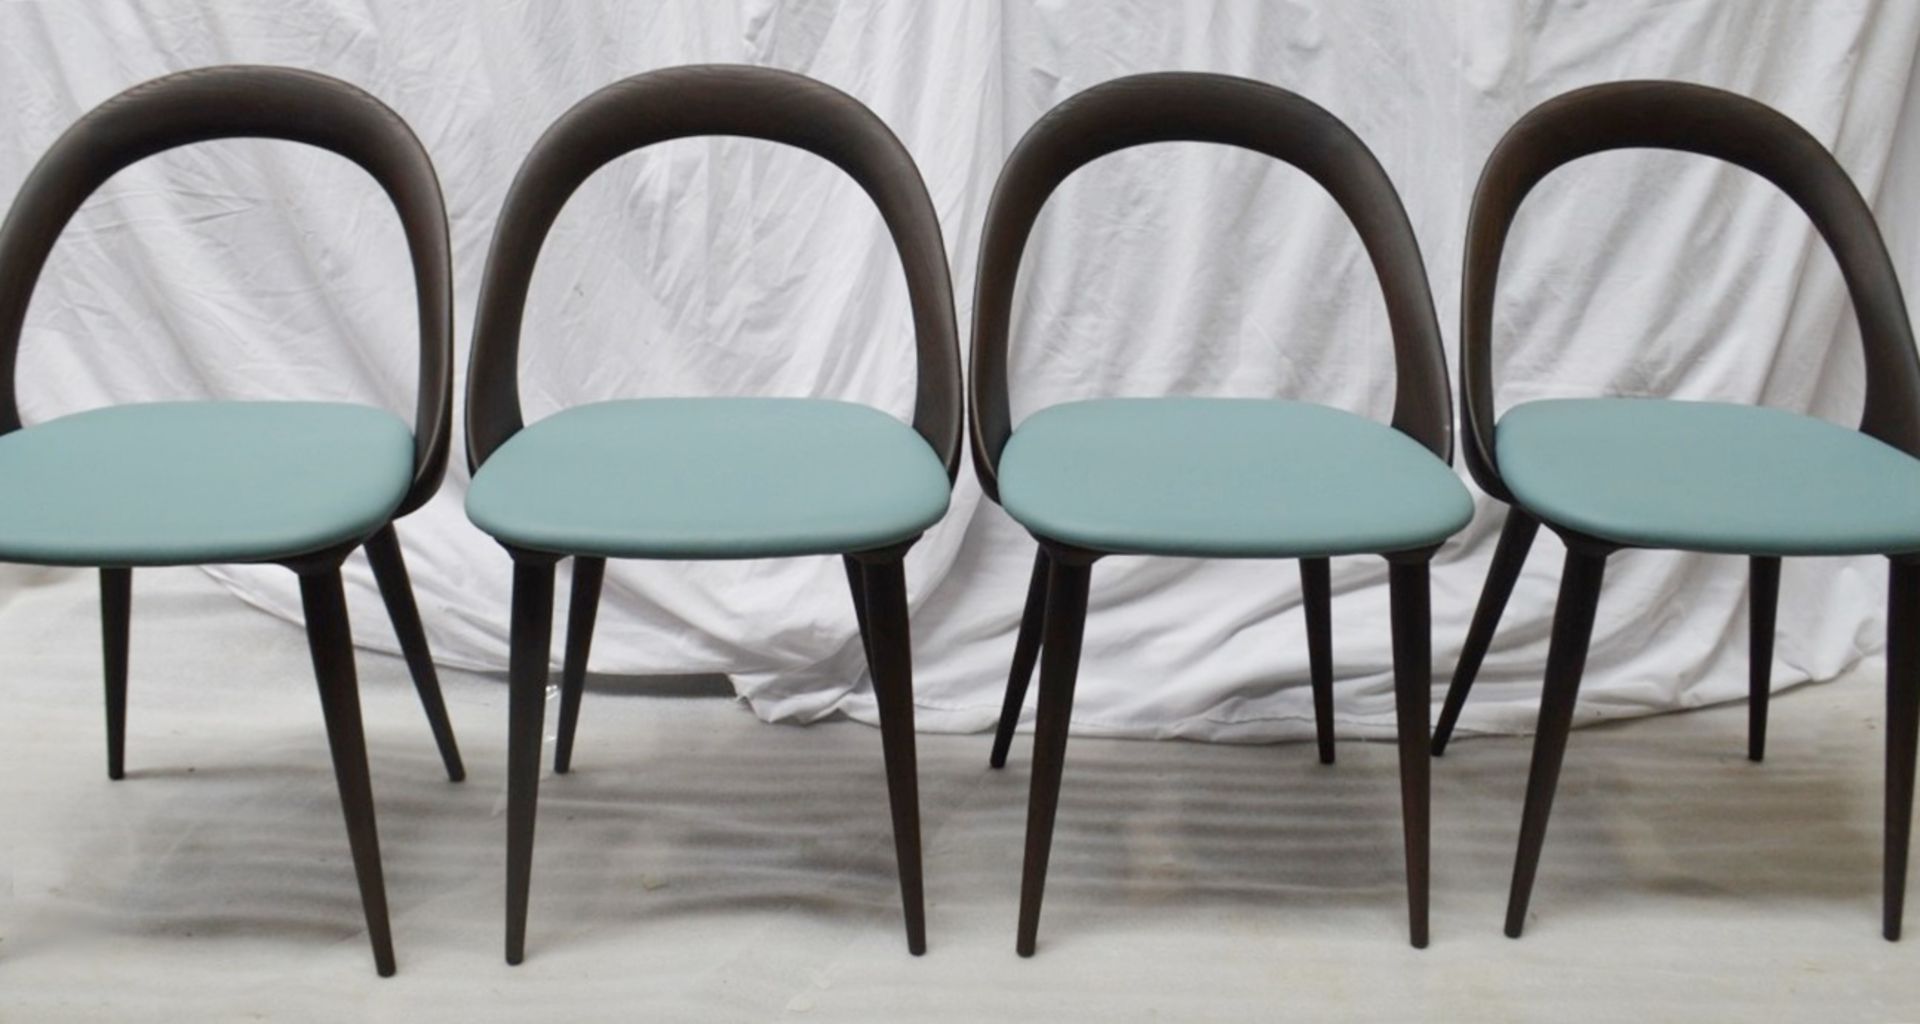 Set Of 4 x PORADA 'Ester' Italian Designer Dining Chairs Featuring Leather Seats - RRP £5,120 - Image 9 of 11